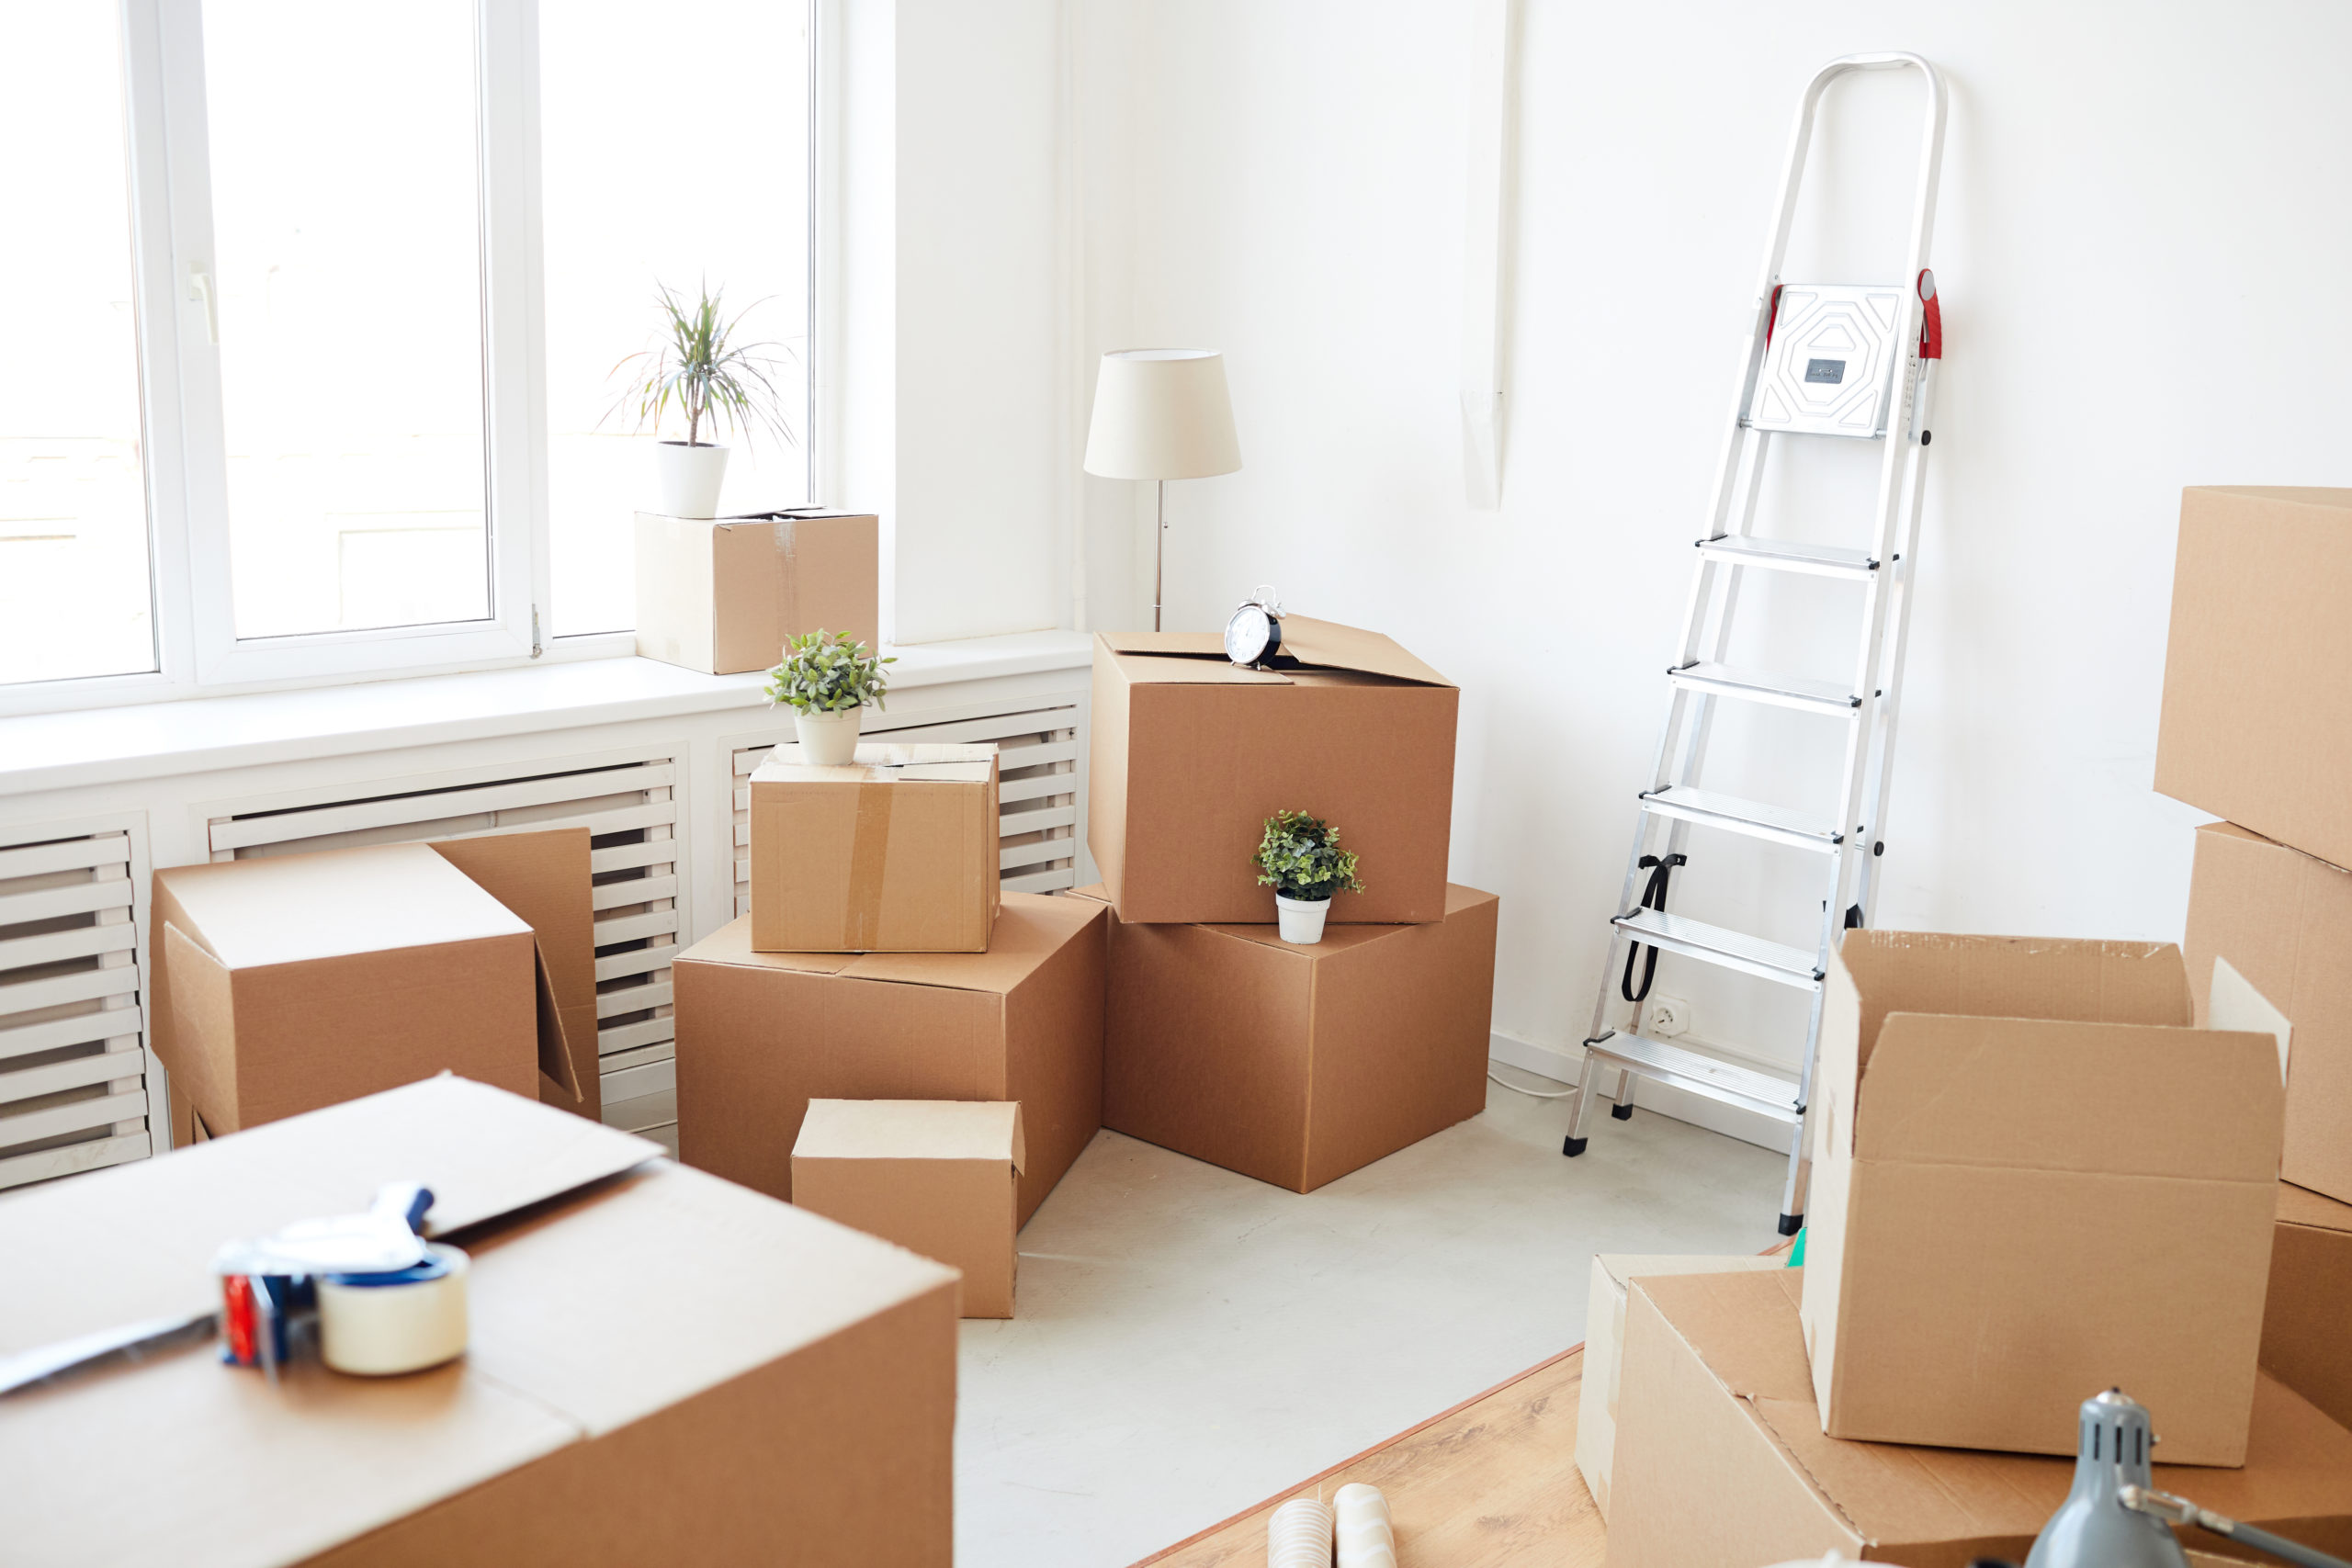 7 Excellent Ways to Save Money on Moving Costs